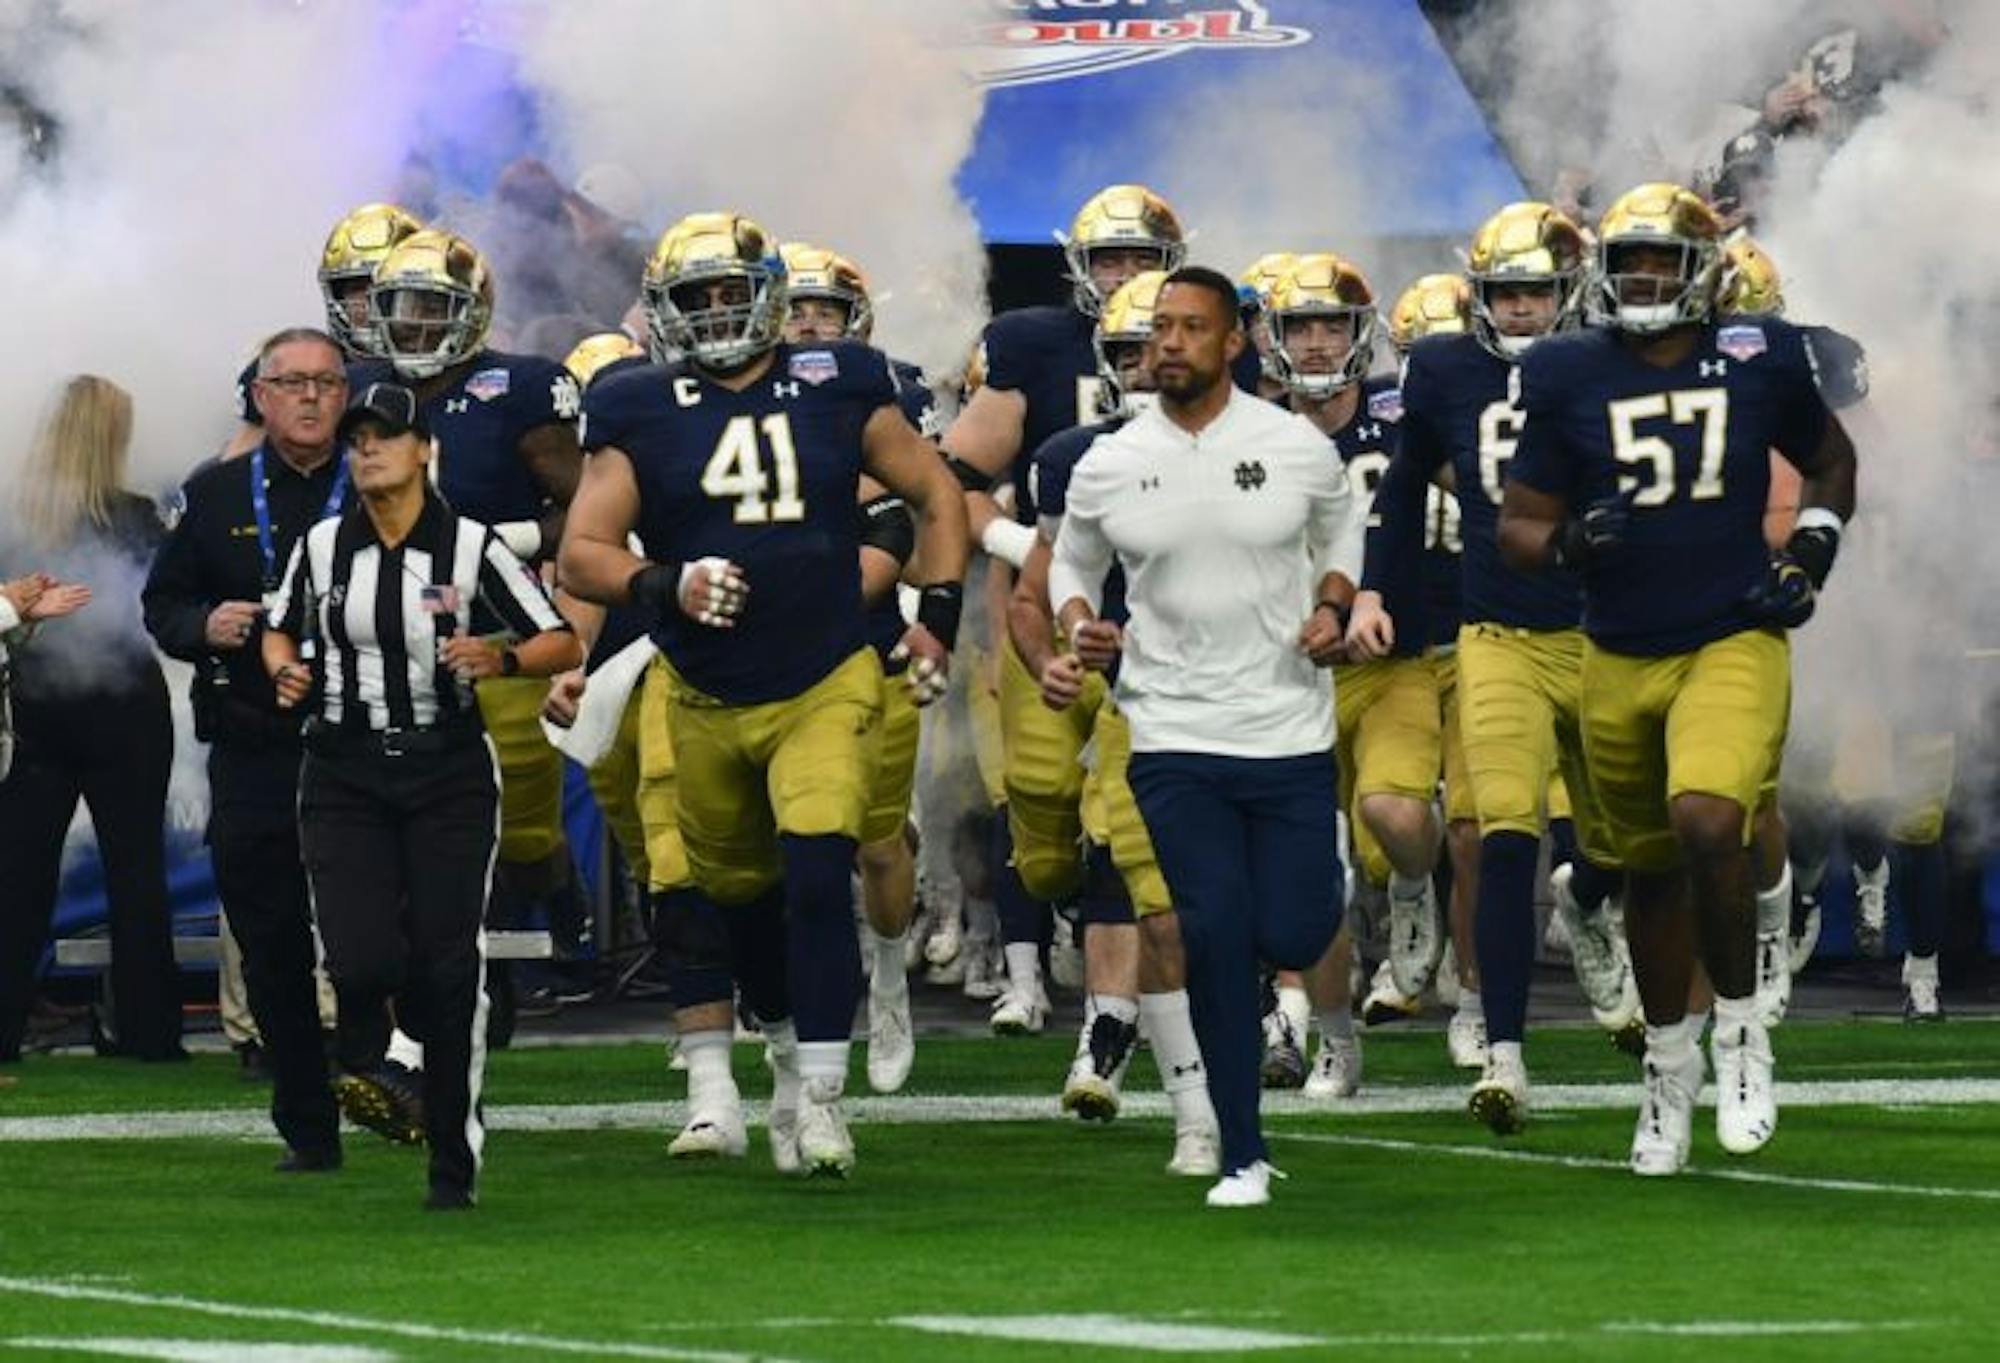 Marcus Freeman leads the Notre Dame out on the field at the Fiesta Bowl.